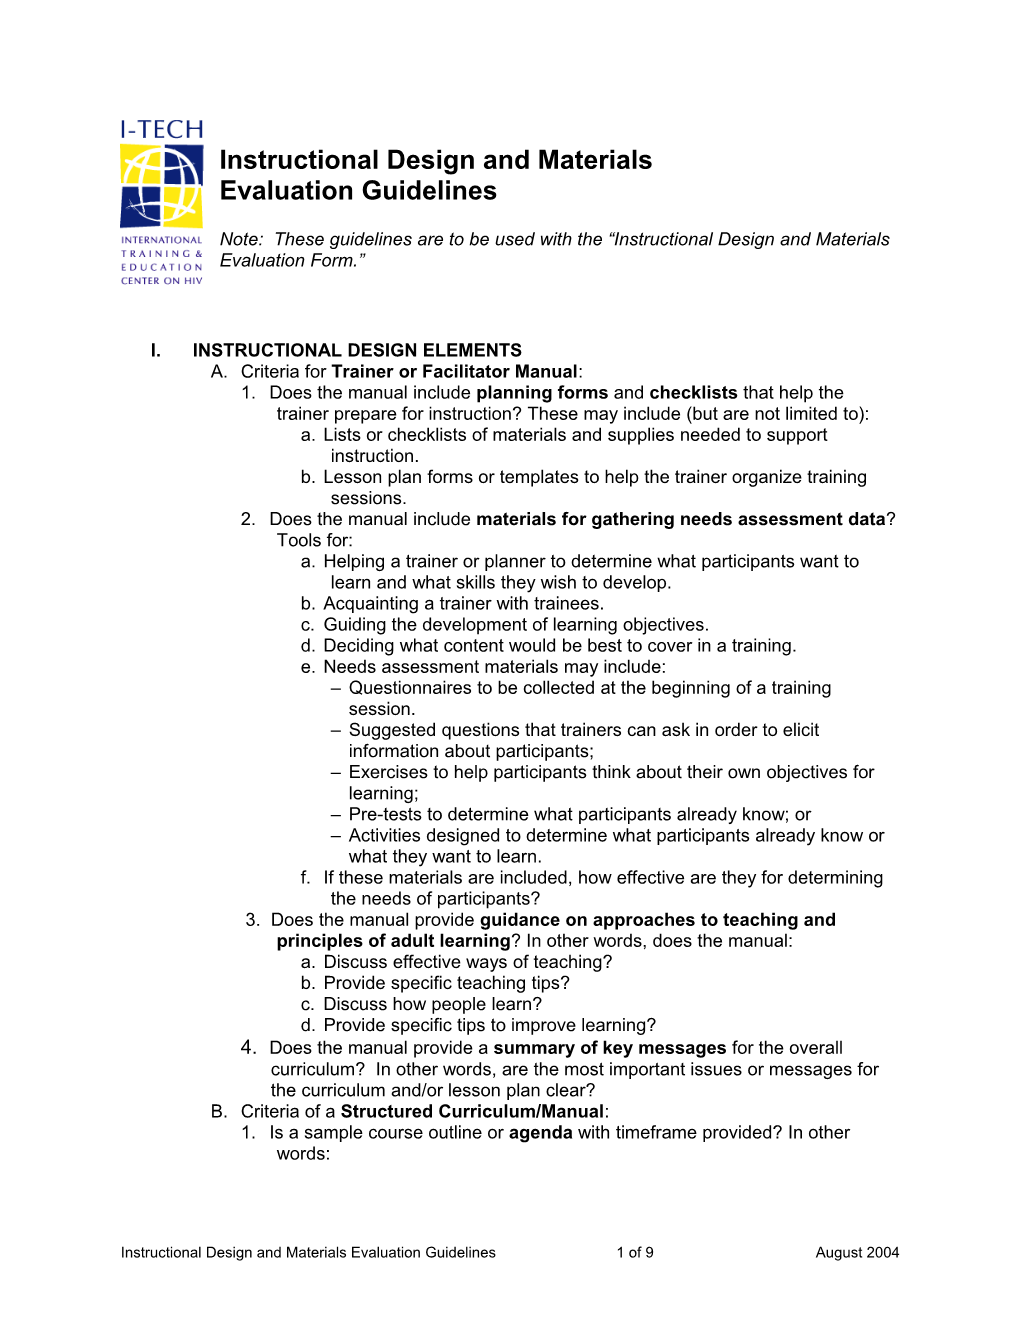 Guidelines for Instructional Design & Materials Evaluation